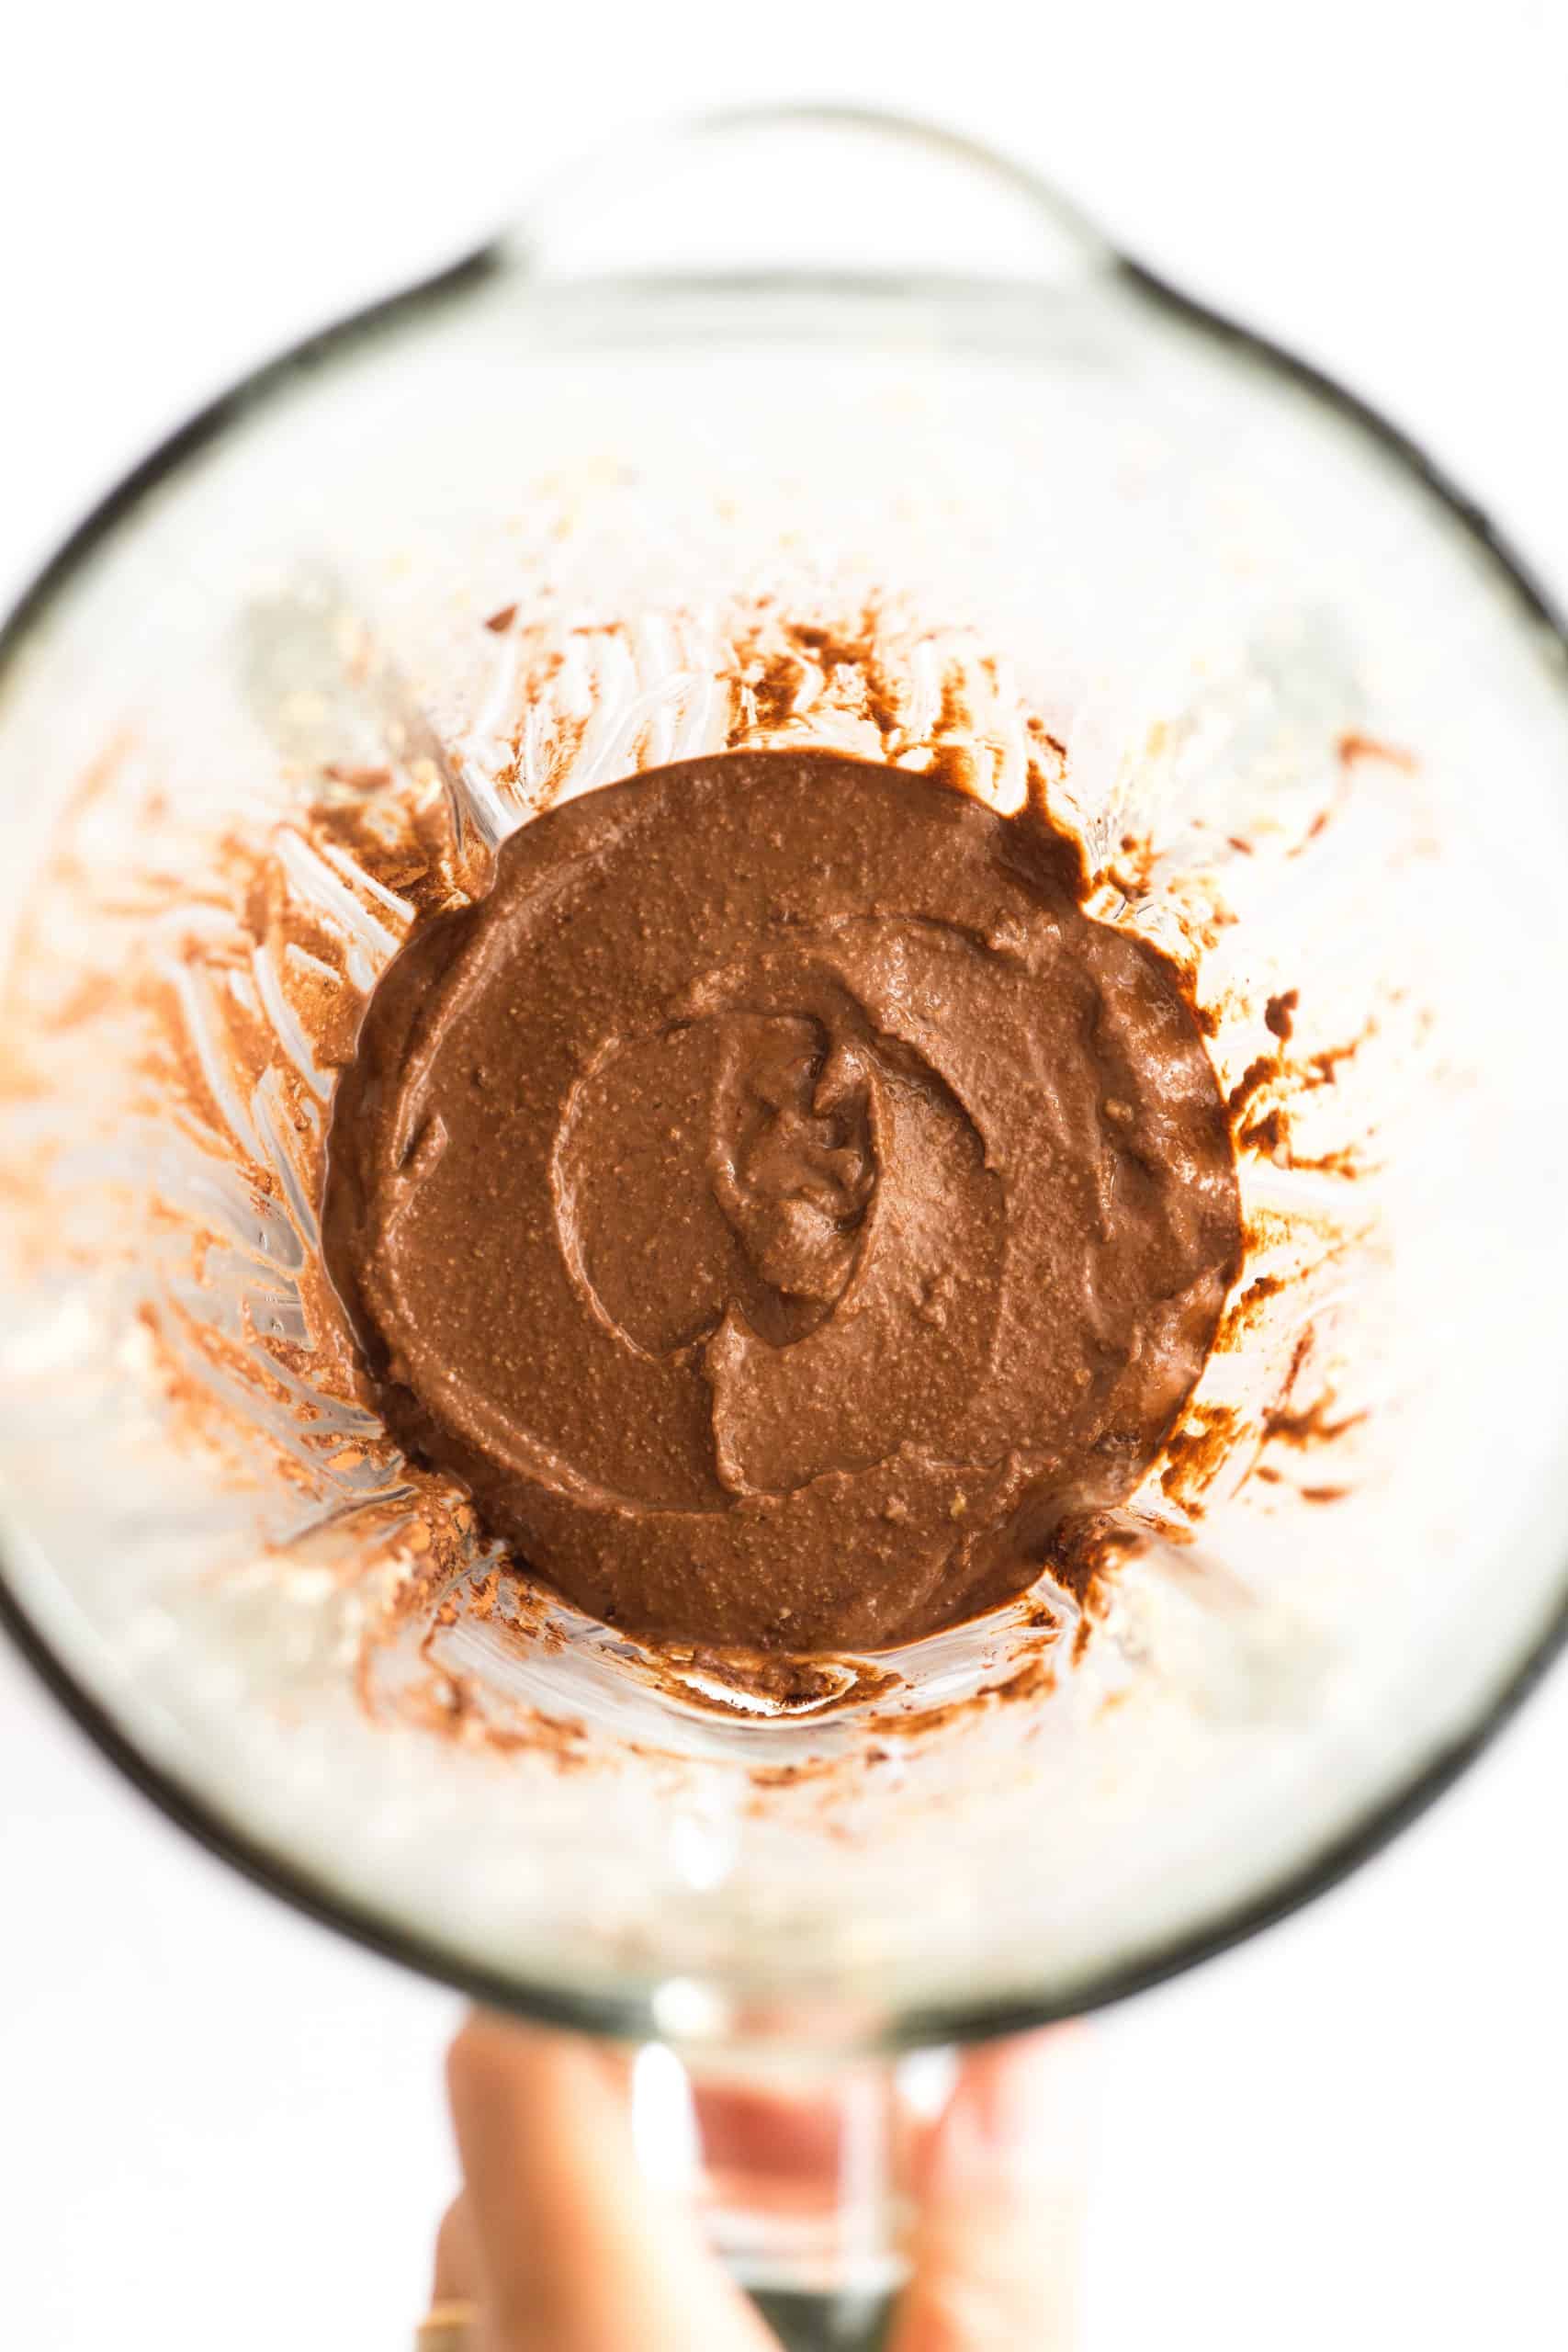 Dairy-free chocolate chocolate pudding in blender.